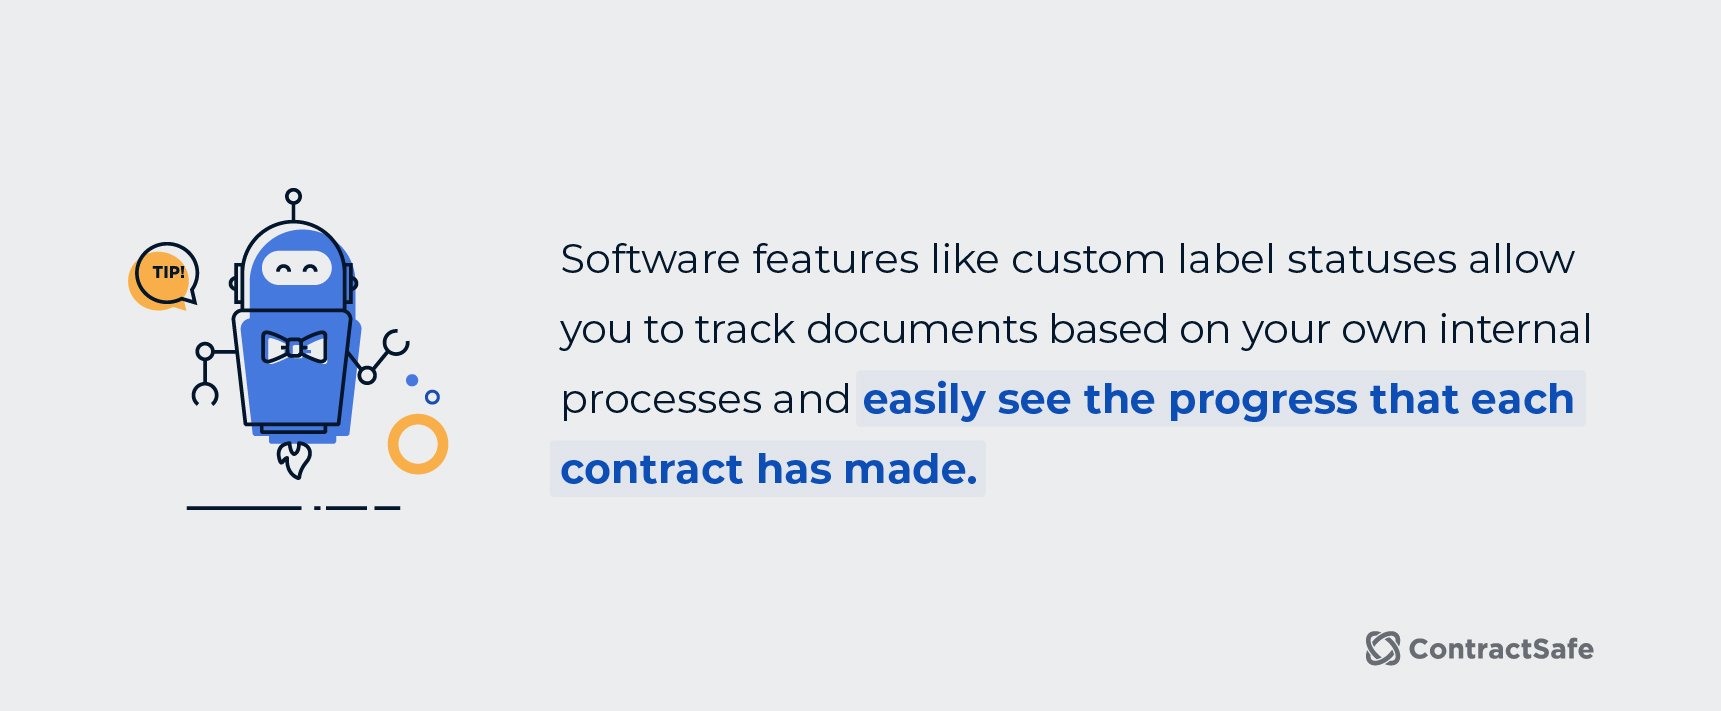 Software features like custom label statuses allow you to track documents based on your own internal processes and easily see the progress that each contract has made